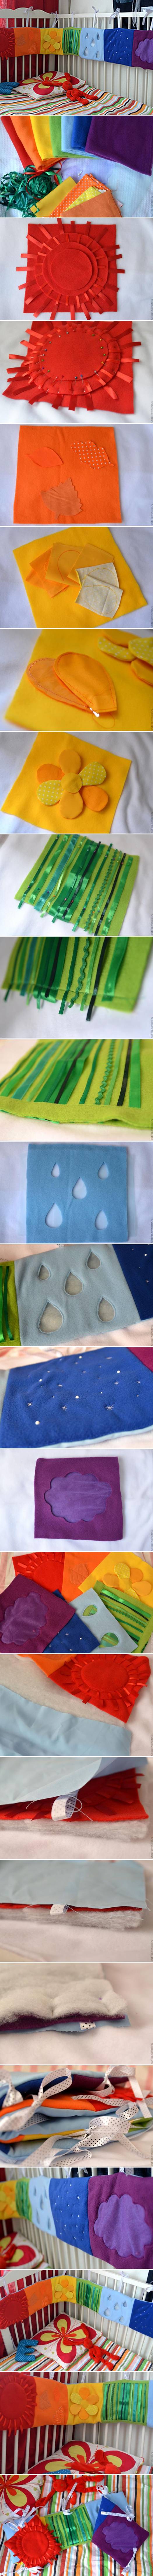 How-to-make-Baby-Side-Toy-Book-Decor-step-by-step-DIY-instructions